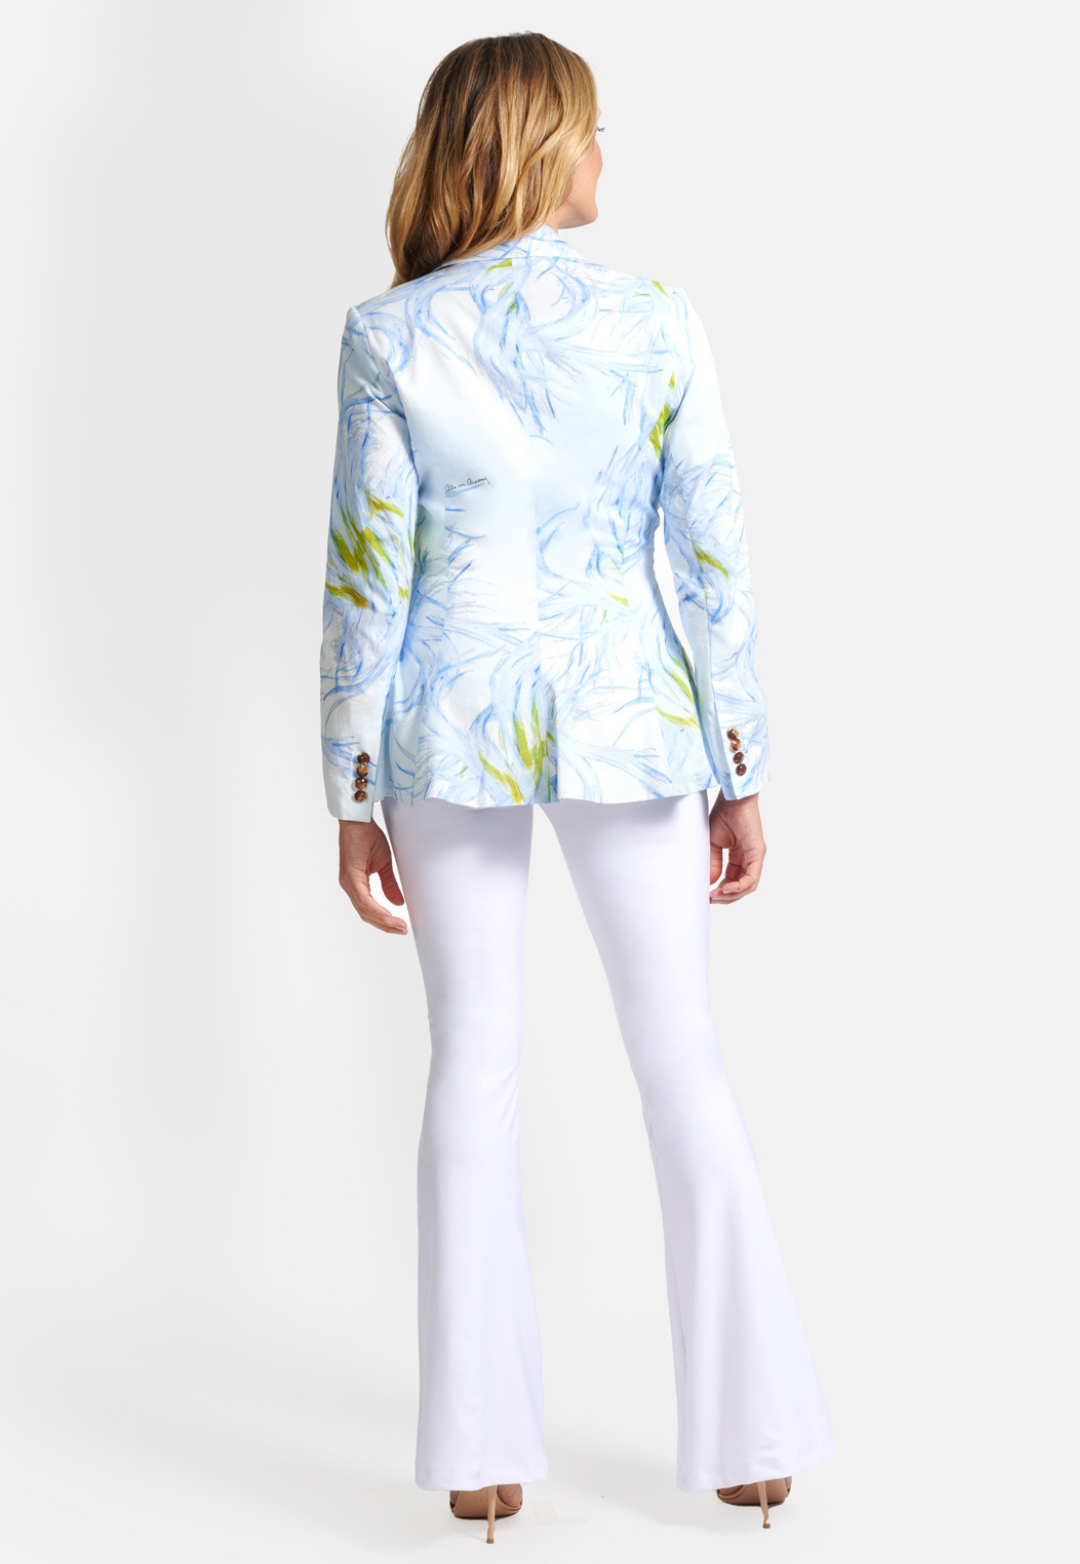 woman wearing blue and yellow feather printed cotton blazer by Ala von Auersperg